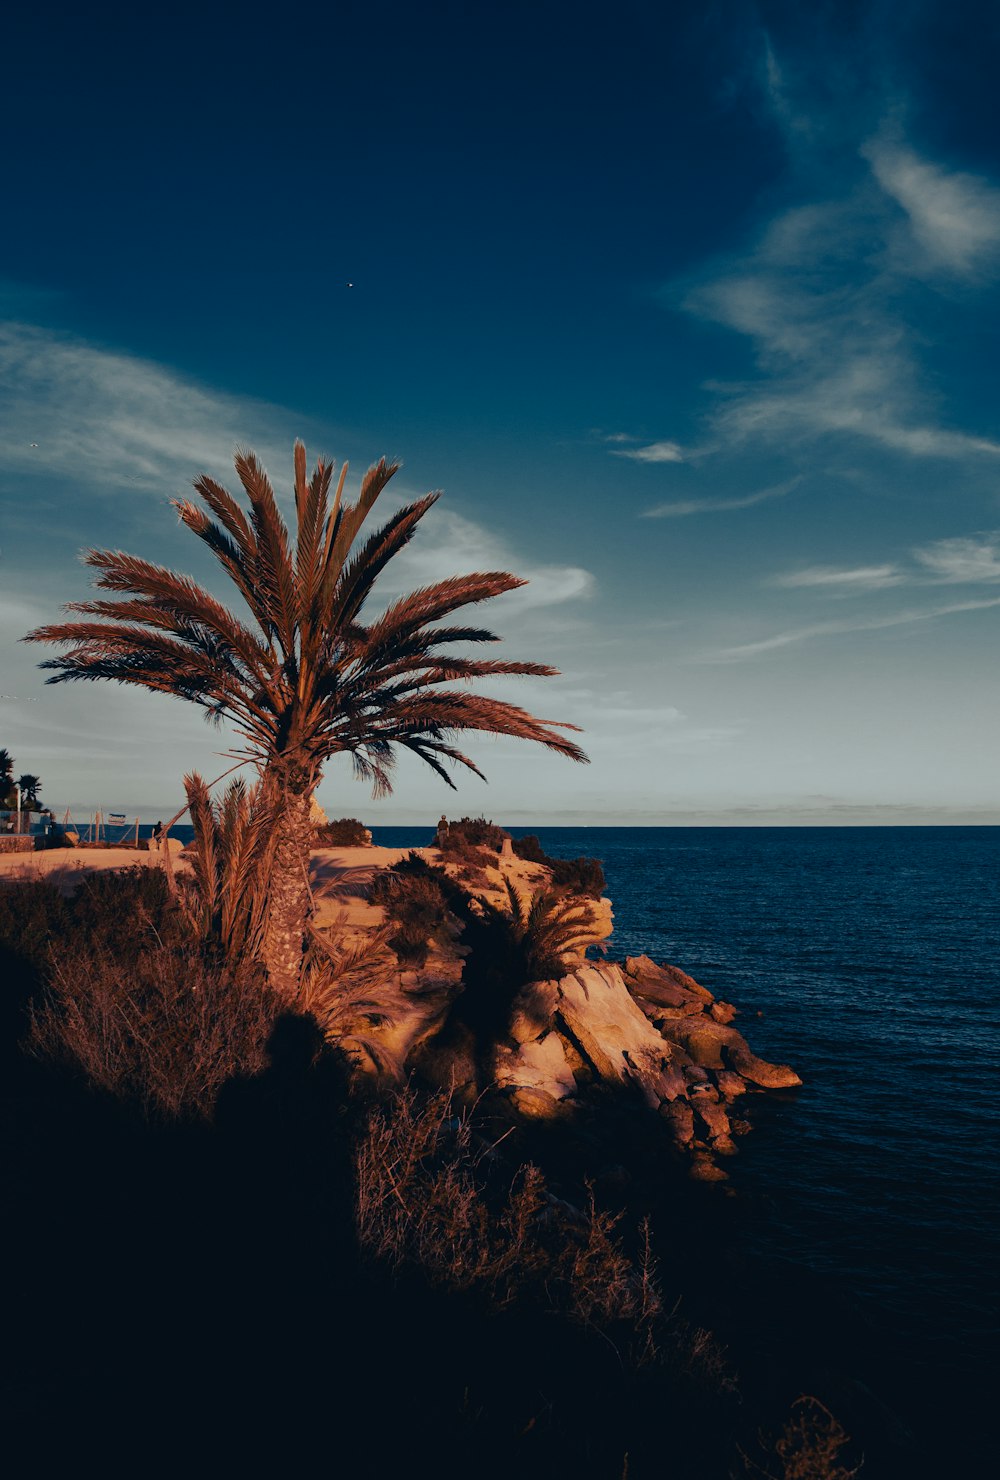 a palm tree on a rocky outcropping next to the ocean